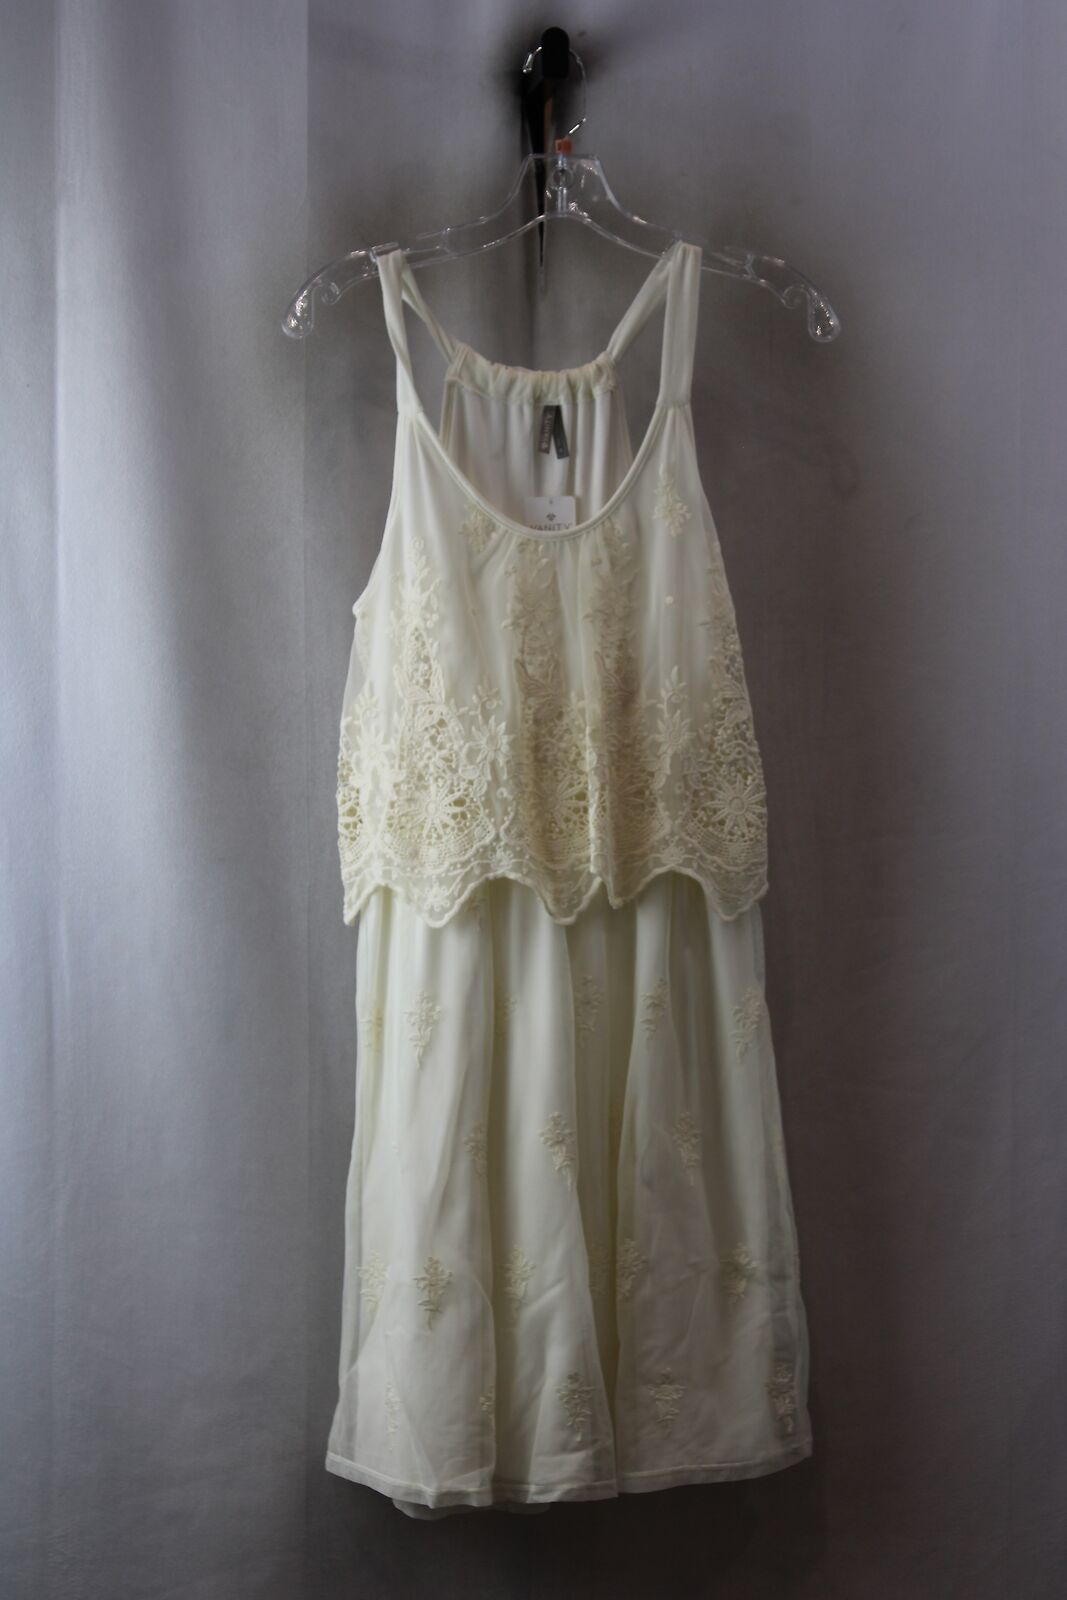 NWT Vanity Women's Ivory Floral Lace Tiered Dress SZ-S